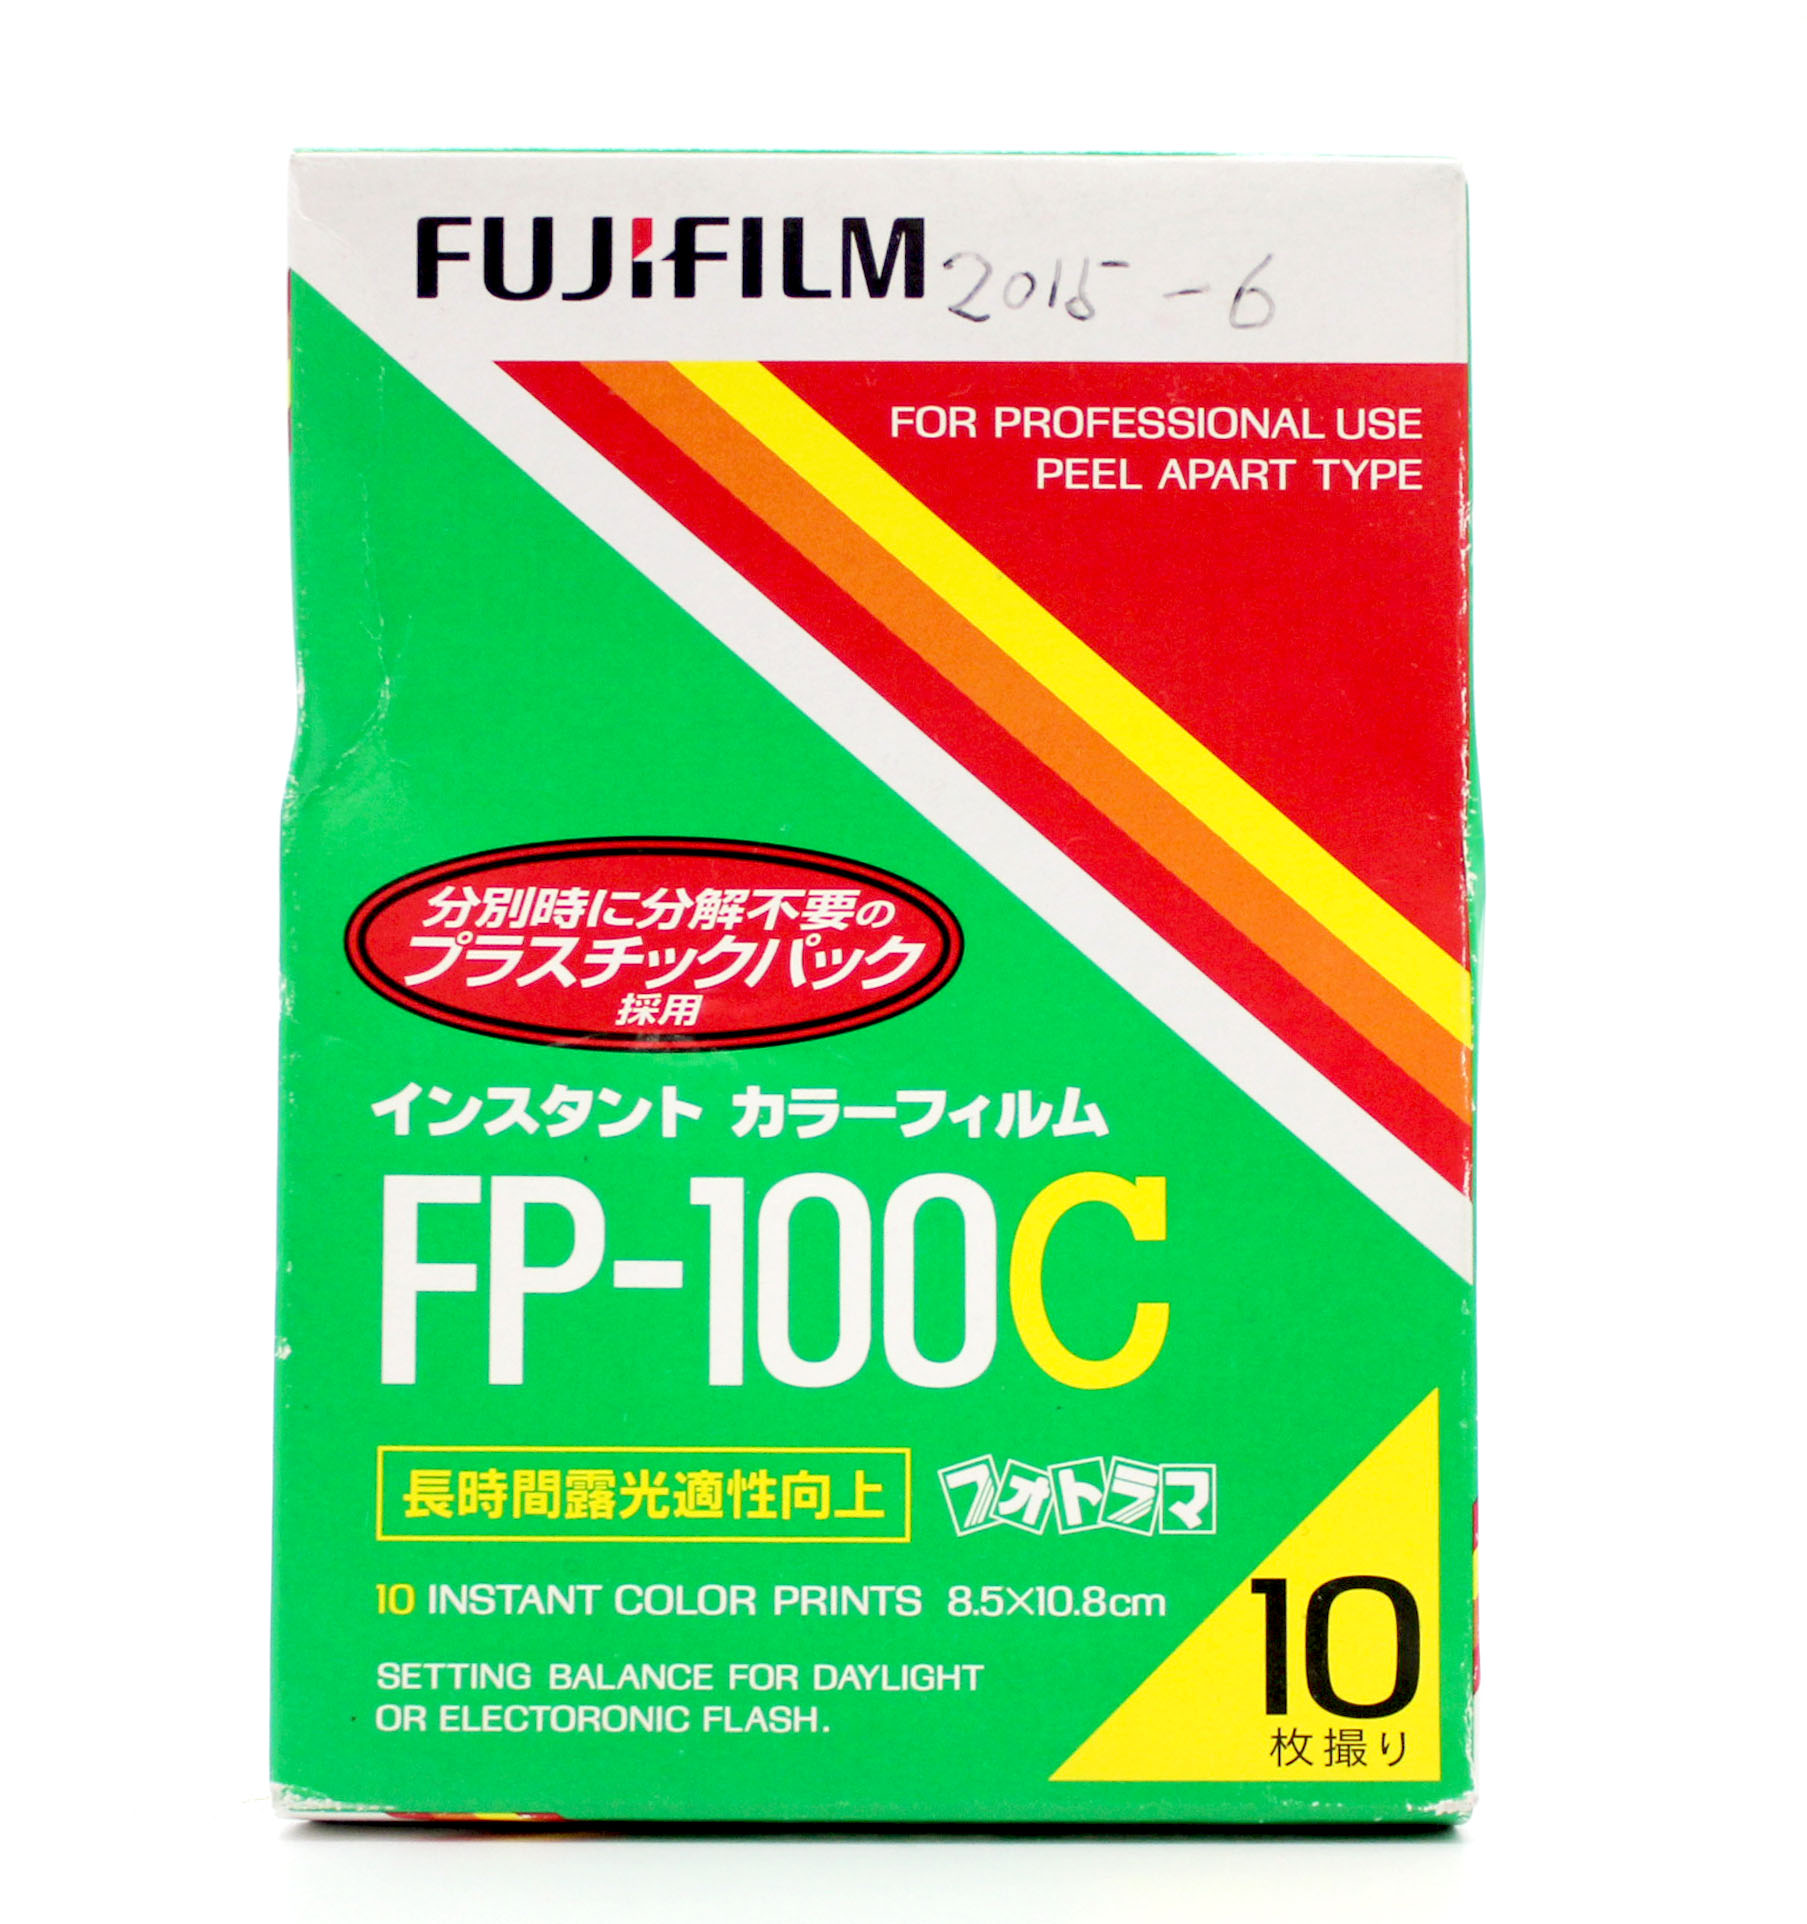  Fujifilm FP-100C Professional Instant Color Film (Expired 6/2015) from Japan Photo 1